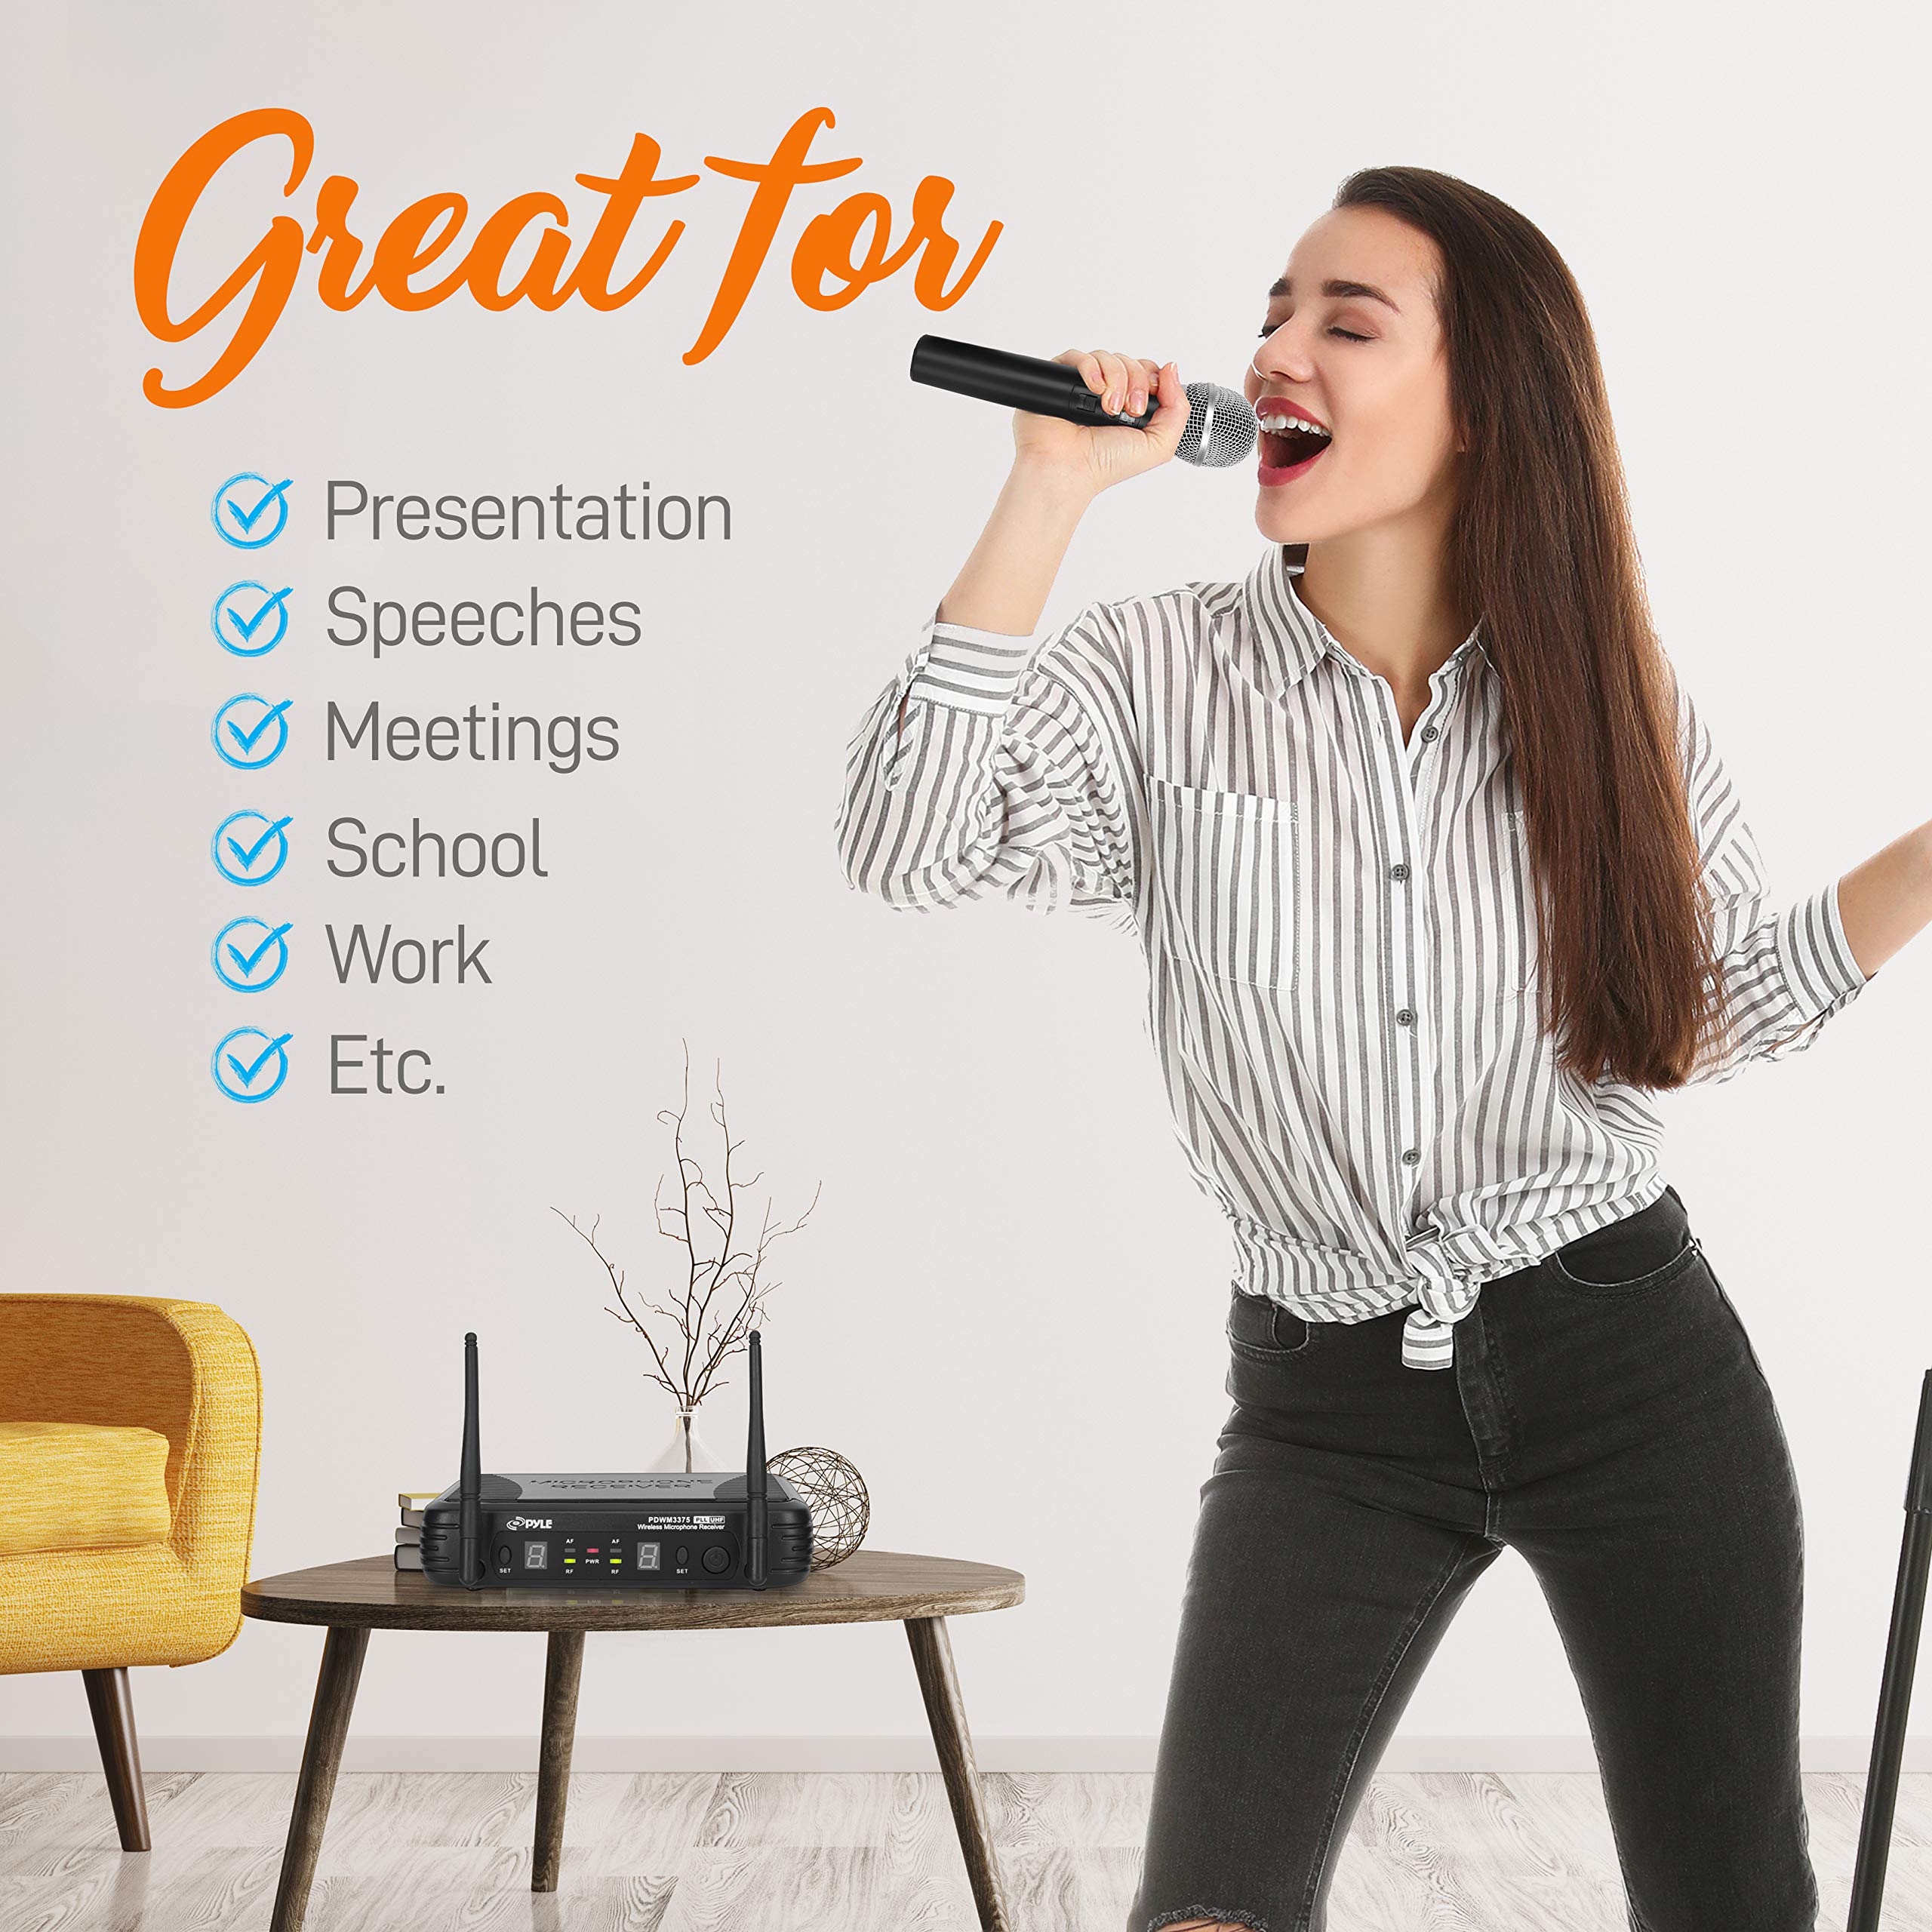 PYLE-PRO Professional Wireless Microphone System - Dual UHF Band, Wireless, Handheld, 2 MICS With 8 Selectable Frequency Channels, Independent Volume Controls, AF & RF Signal Indicators - PDWM3375